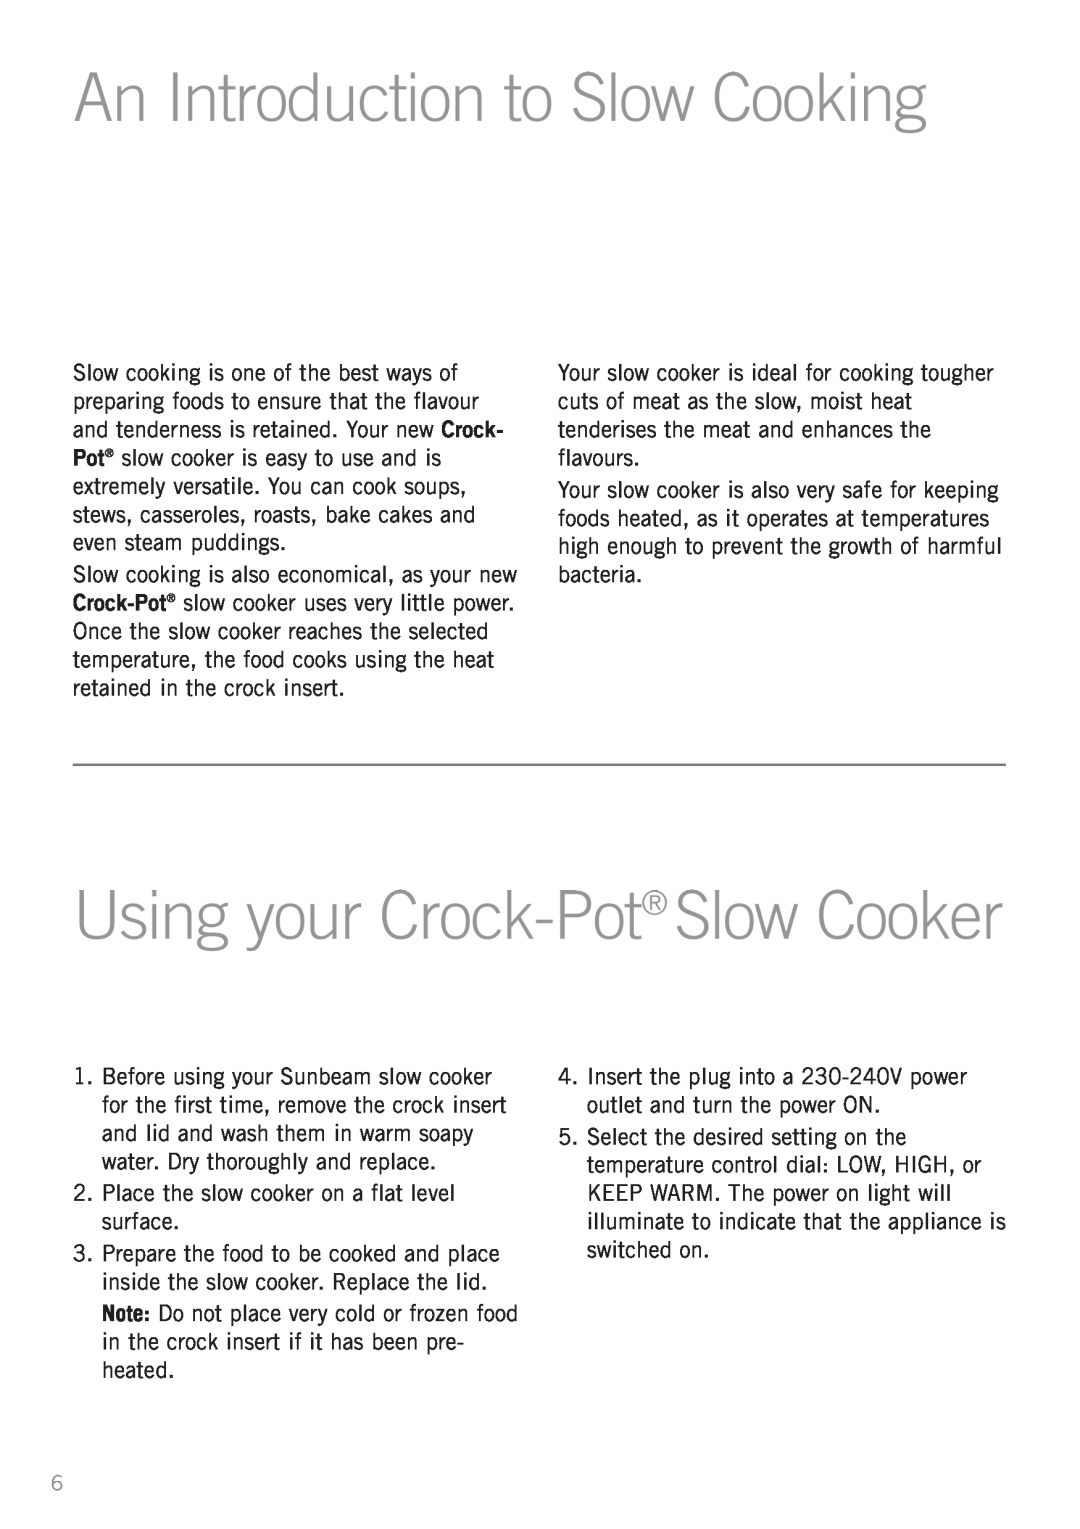 Sunbeam HP3400, HP2200 manual An Introduction to Slow Cooking, Using your Crock-Pot Slow Cooker 